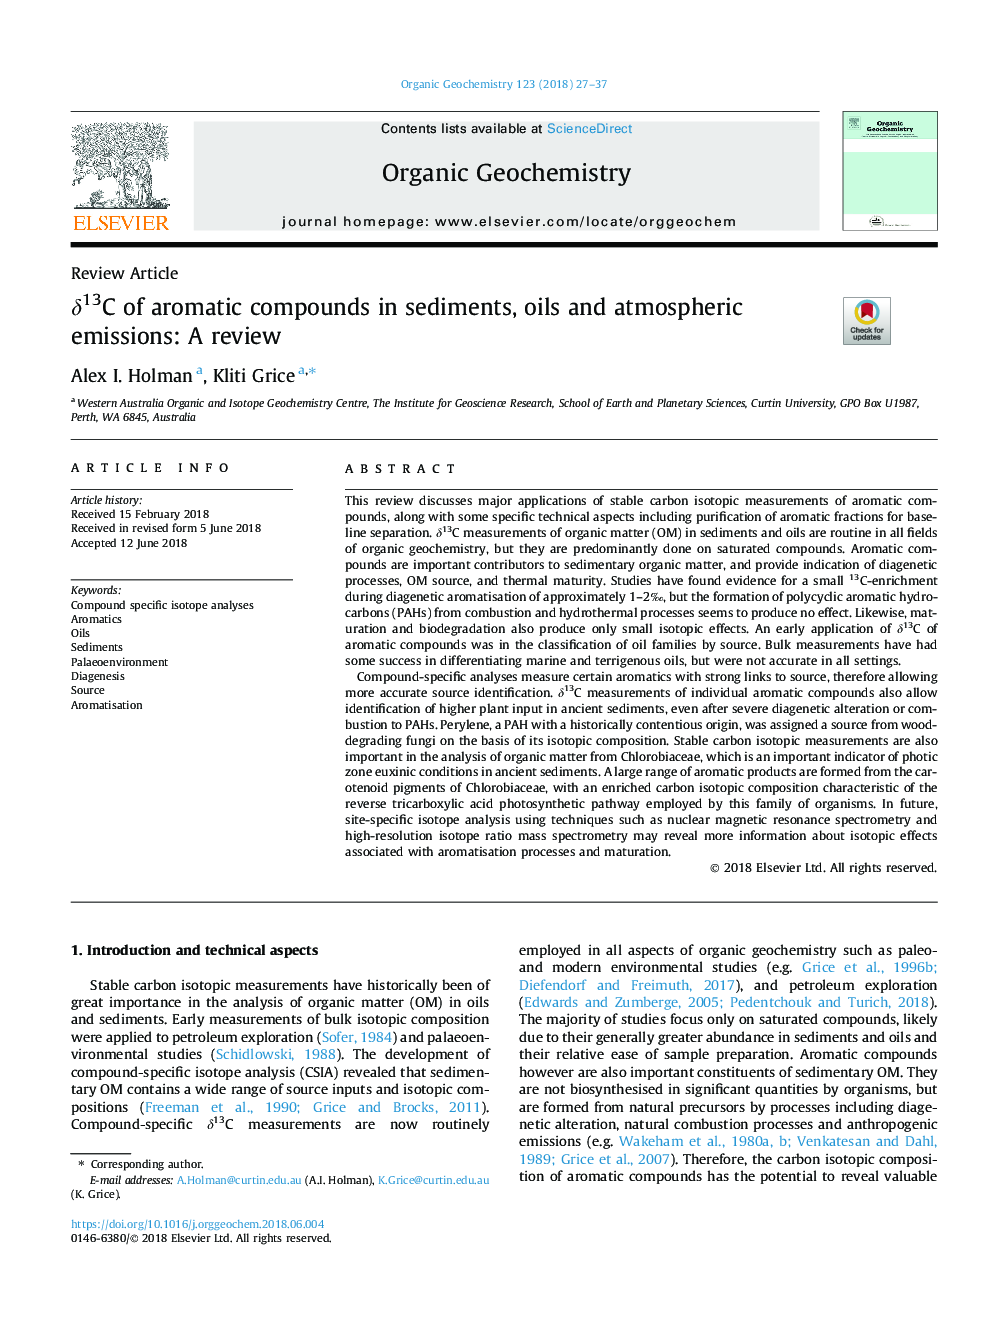 Î´13C of aromatic compounds in sediments, oils and atmospheric emissions: A review